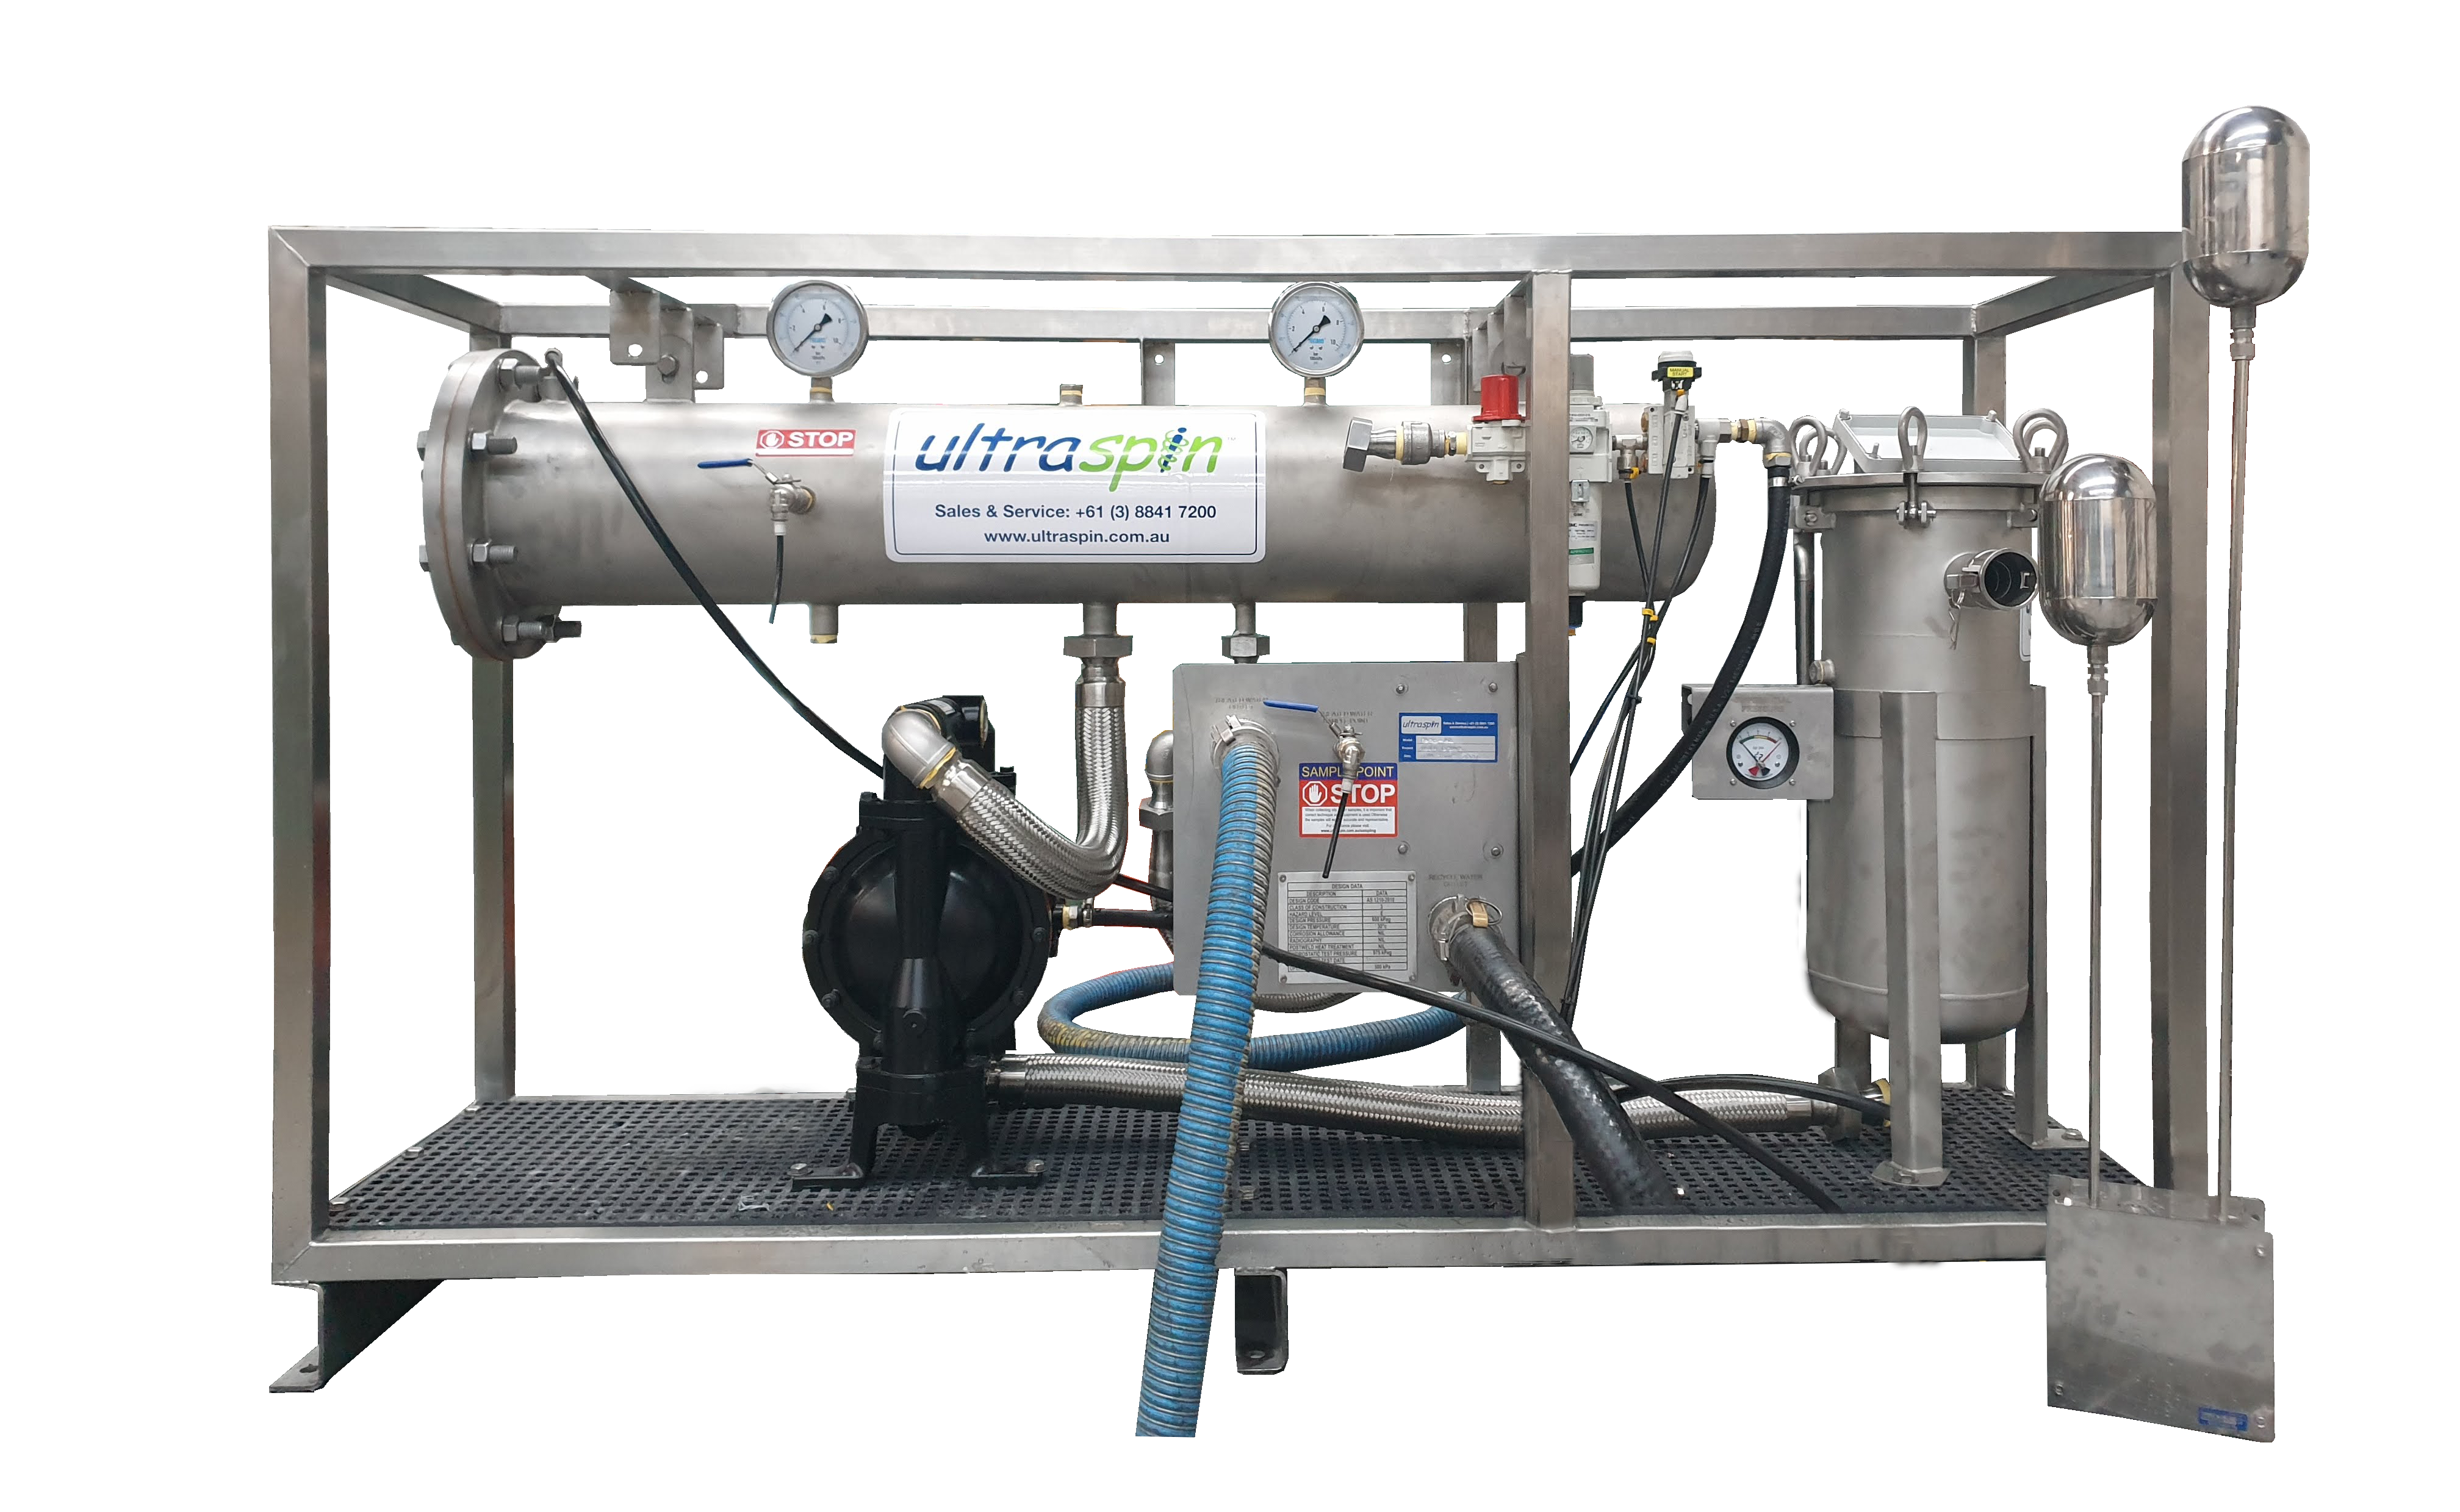 The Pneumatic Separator from Ultraspin